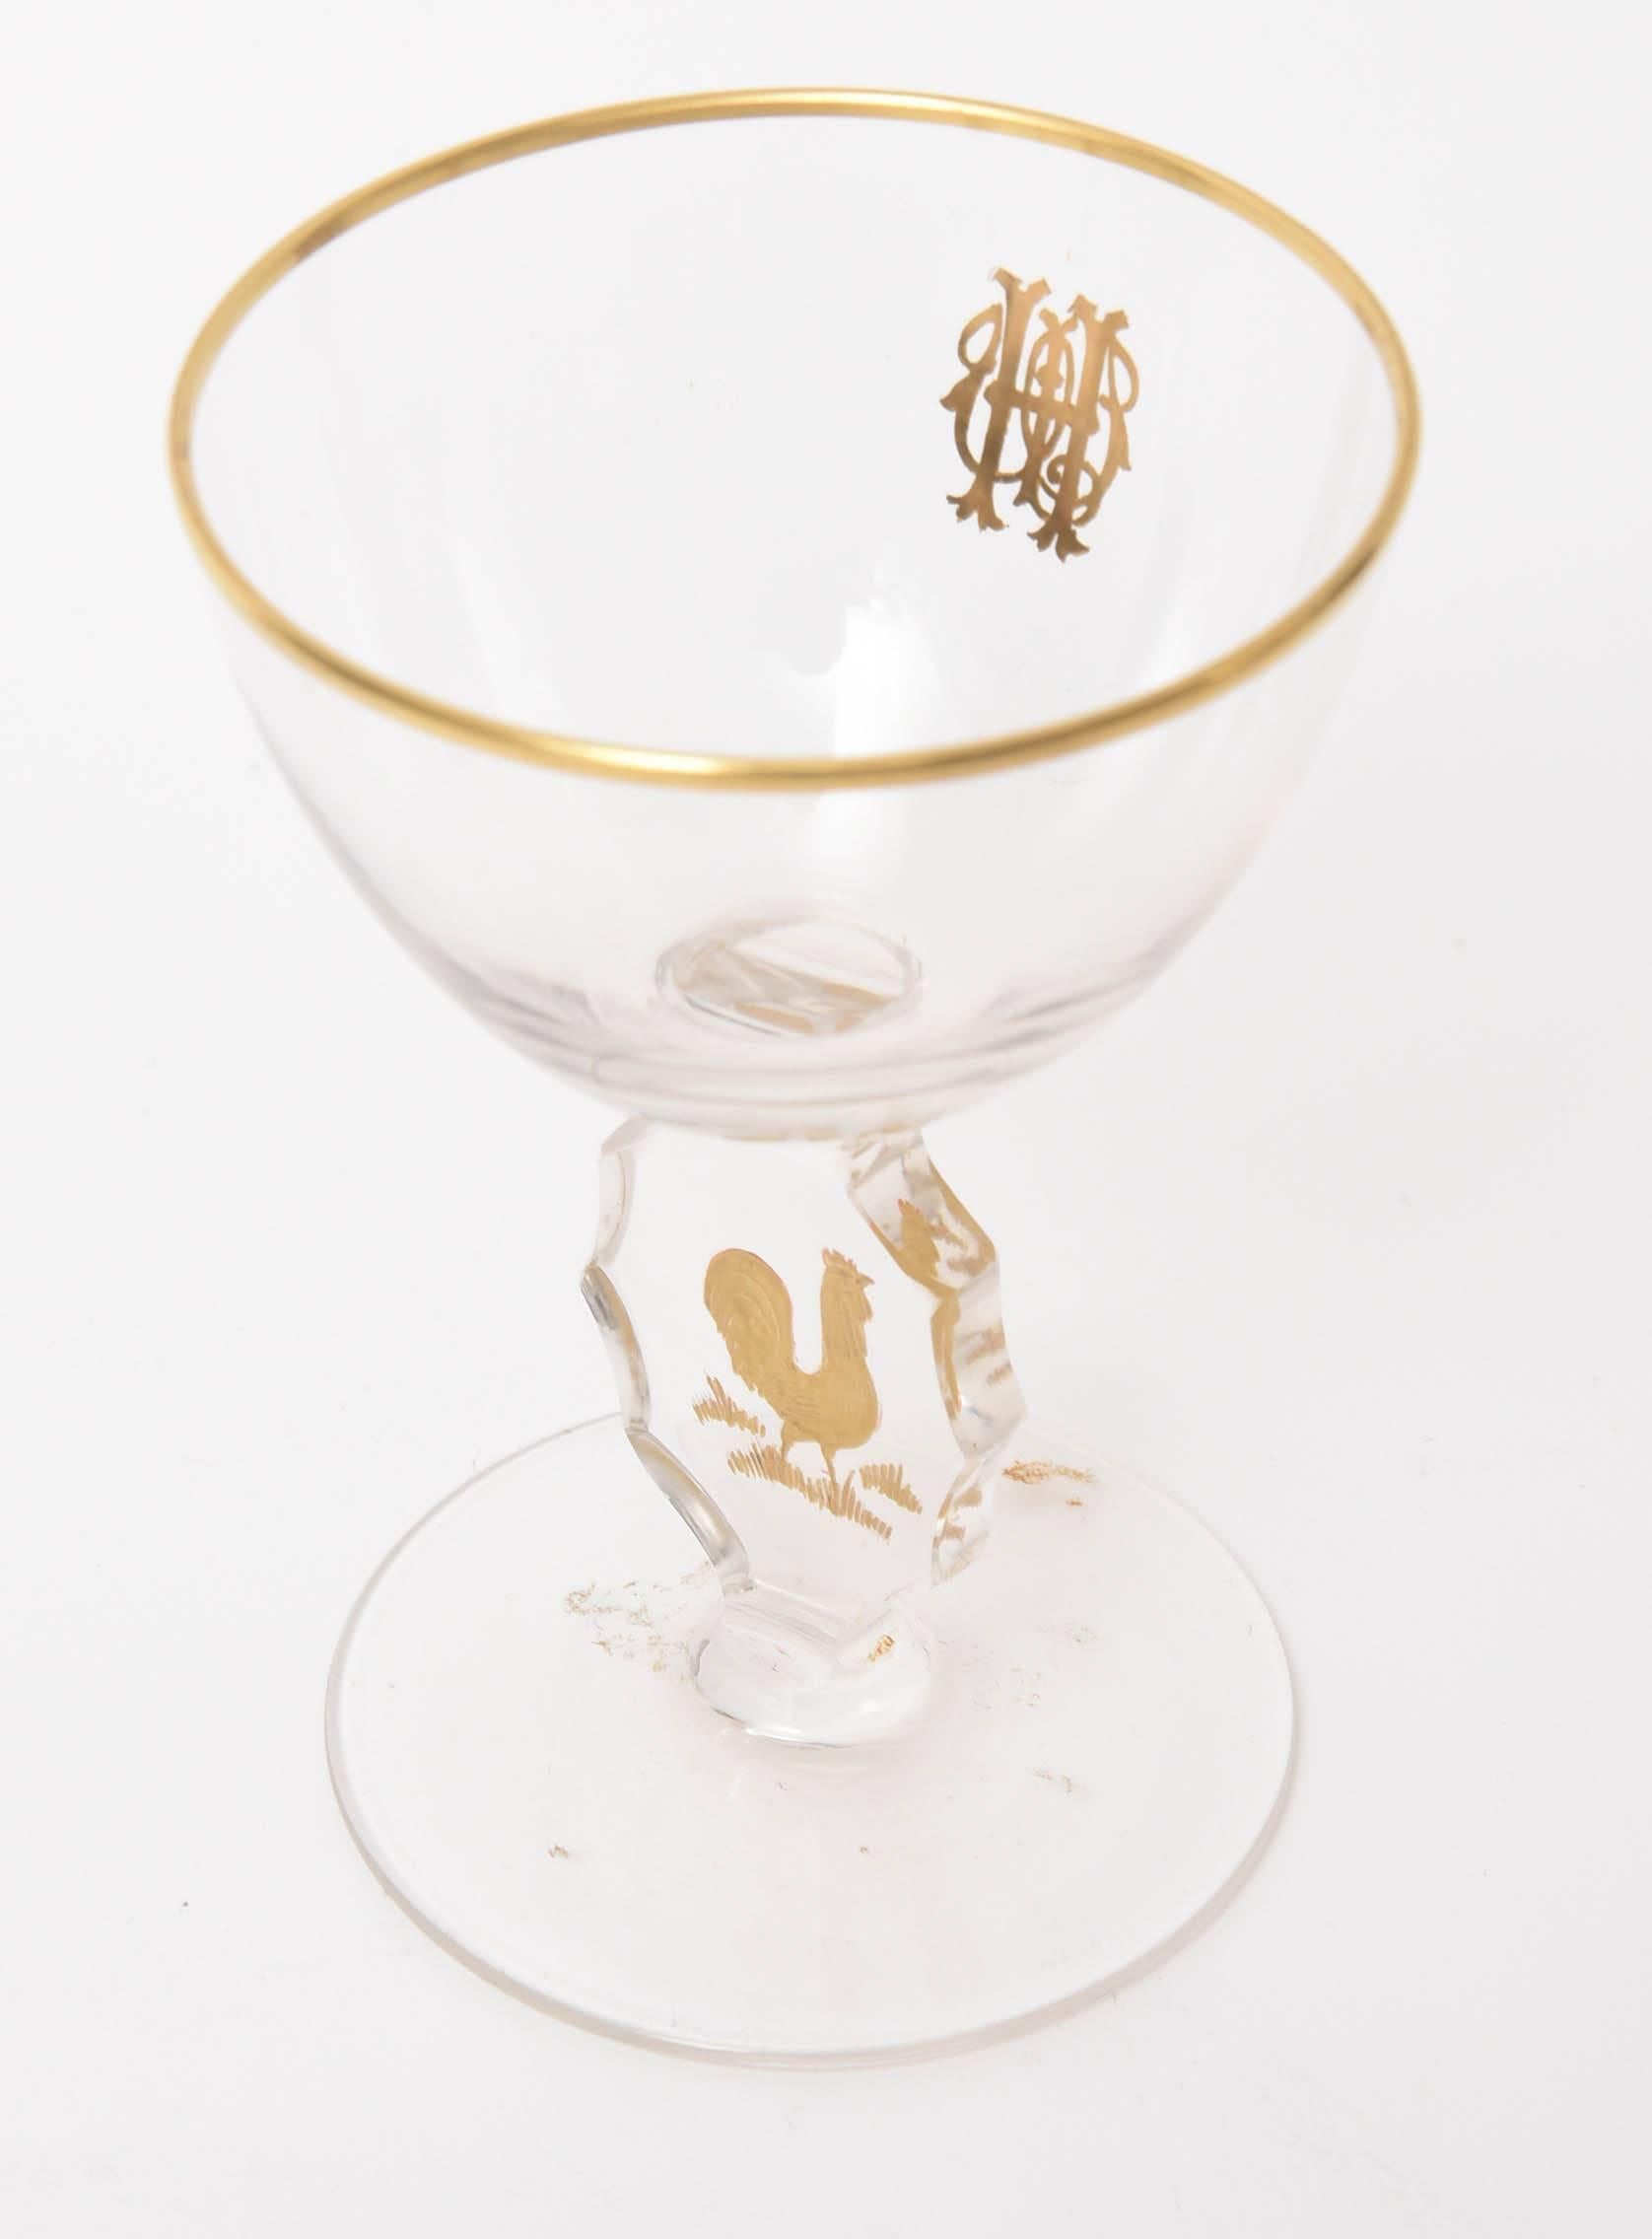 Set of 15 Cocktail Glasses, Gilded Rooster with Cut Stem and Raised Monogram 3